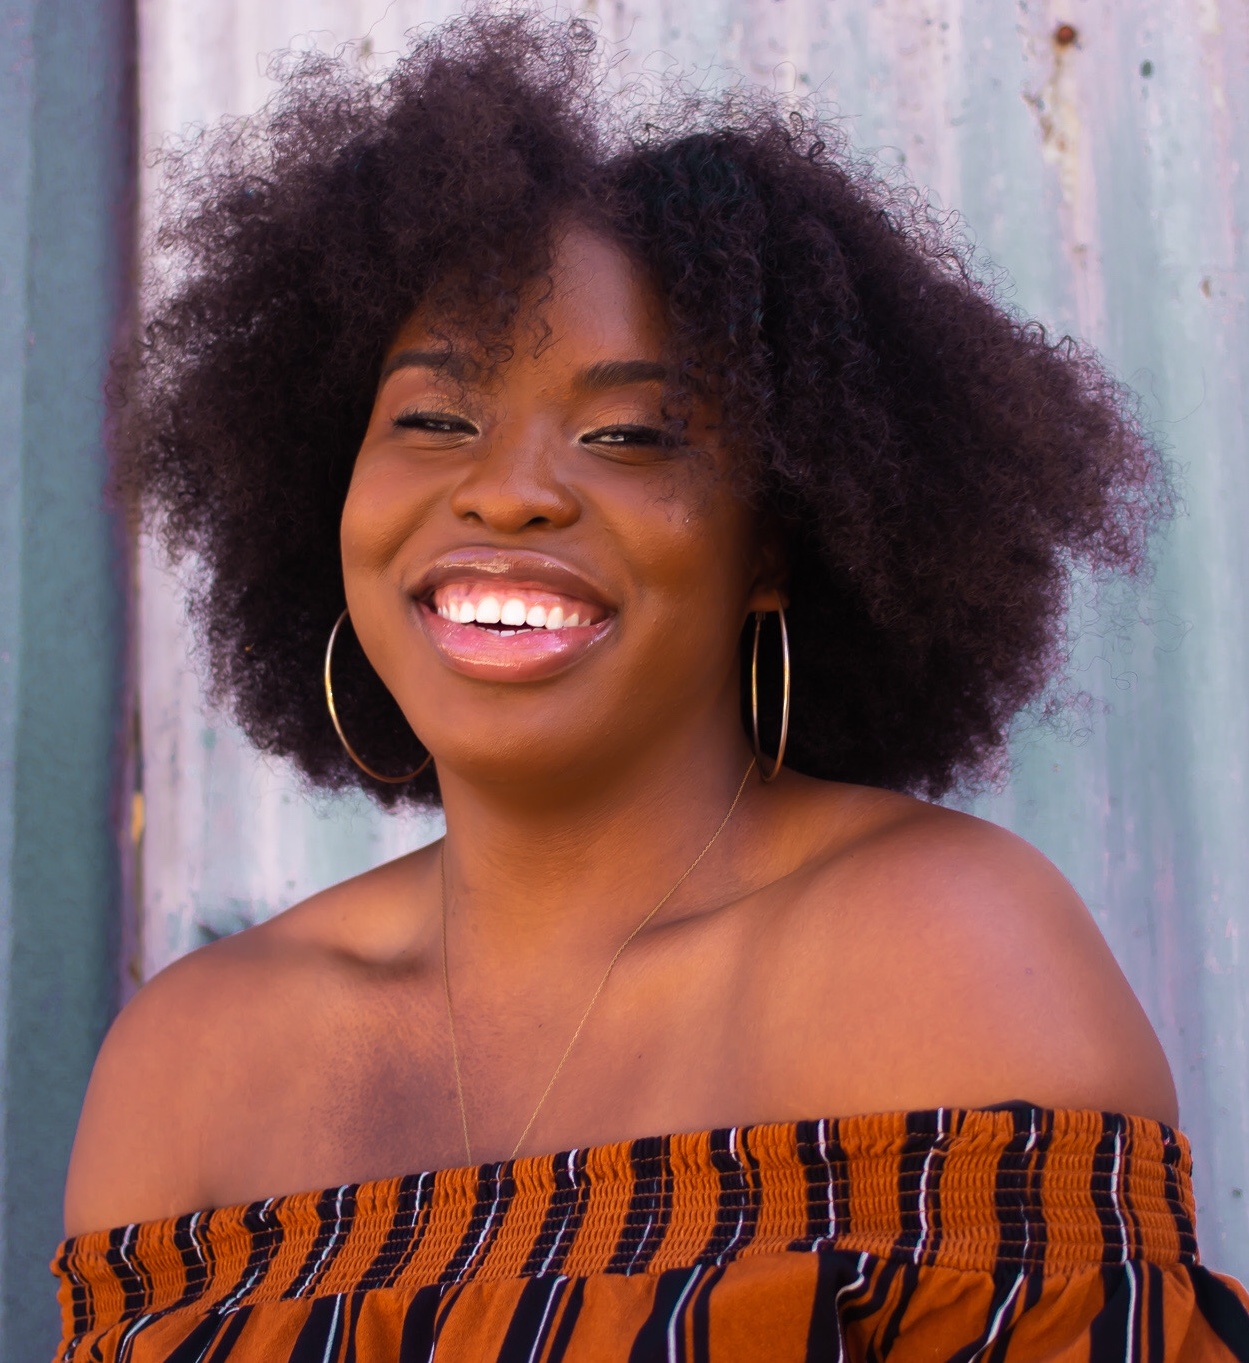 A black woman smiling at the camera with natural curly hair